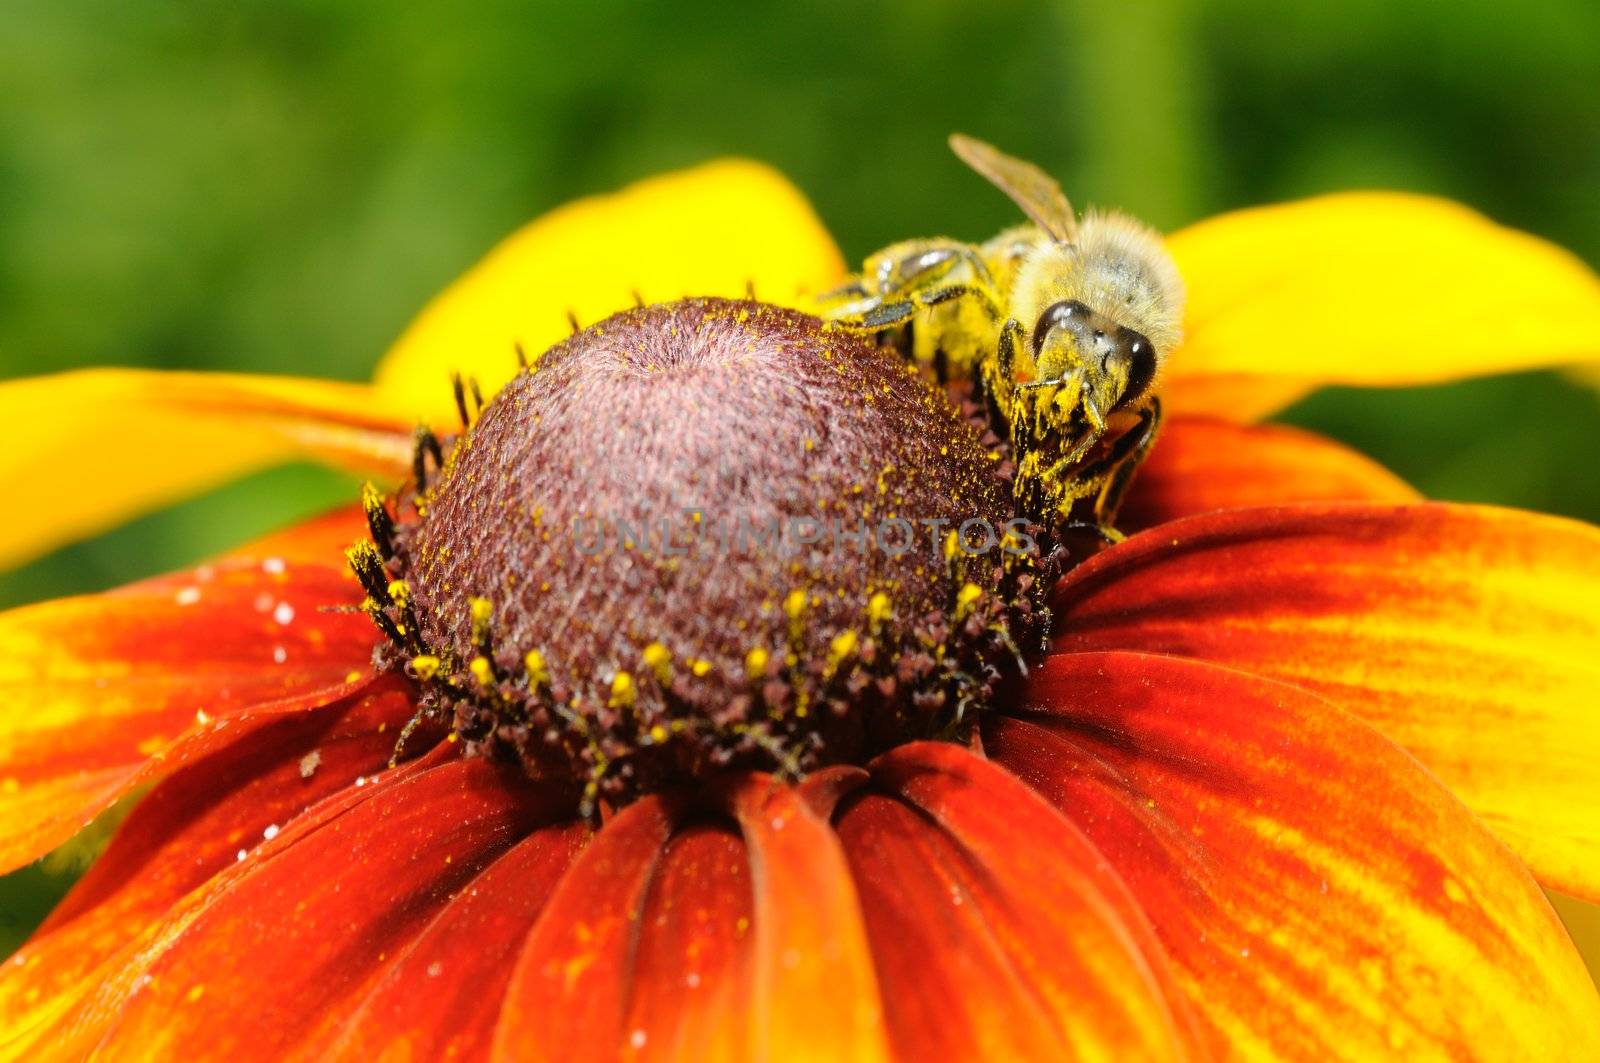 Close-up of bee on sunflower. Shallow depth of field and focus on bee.